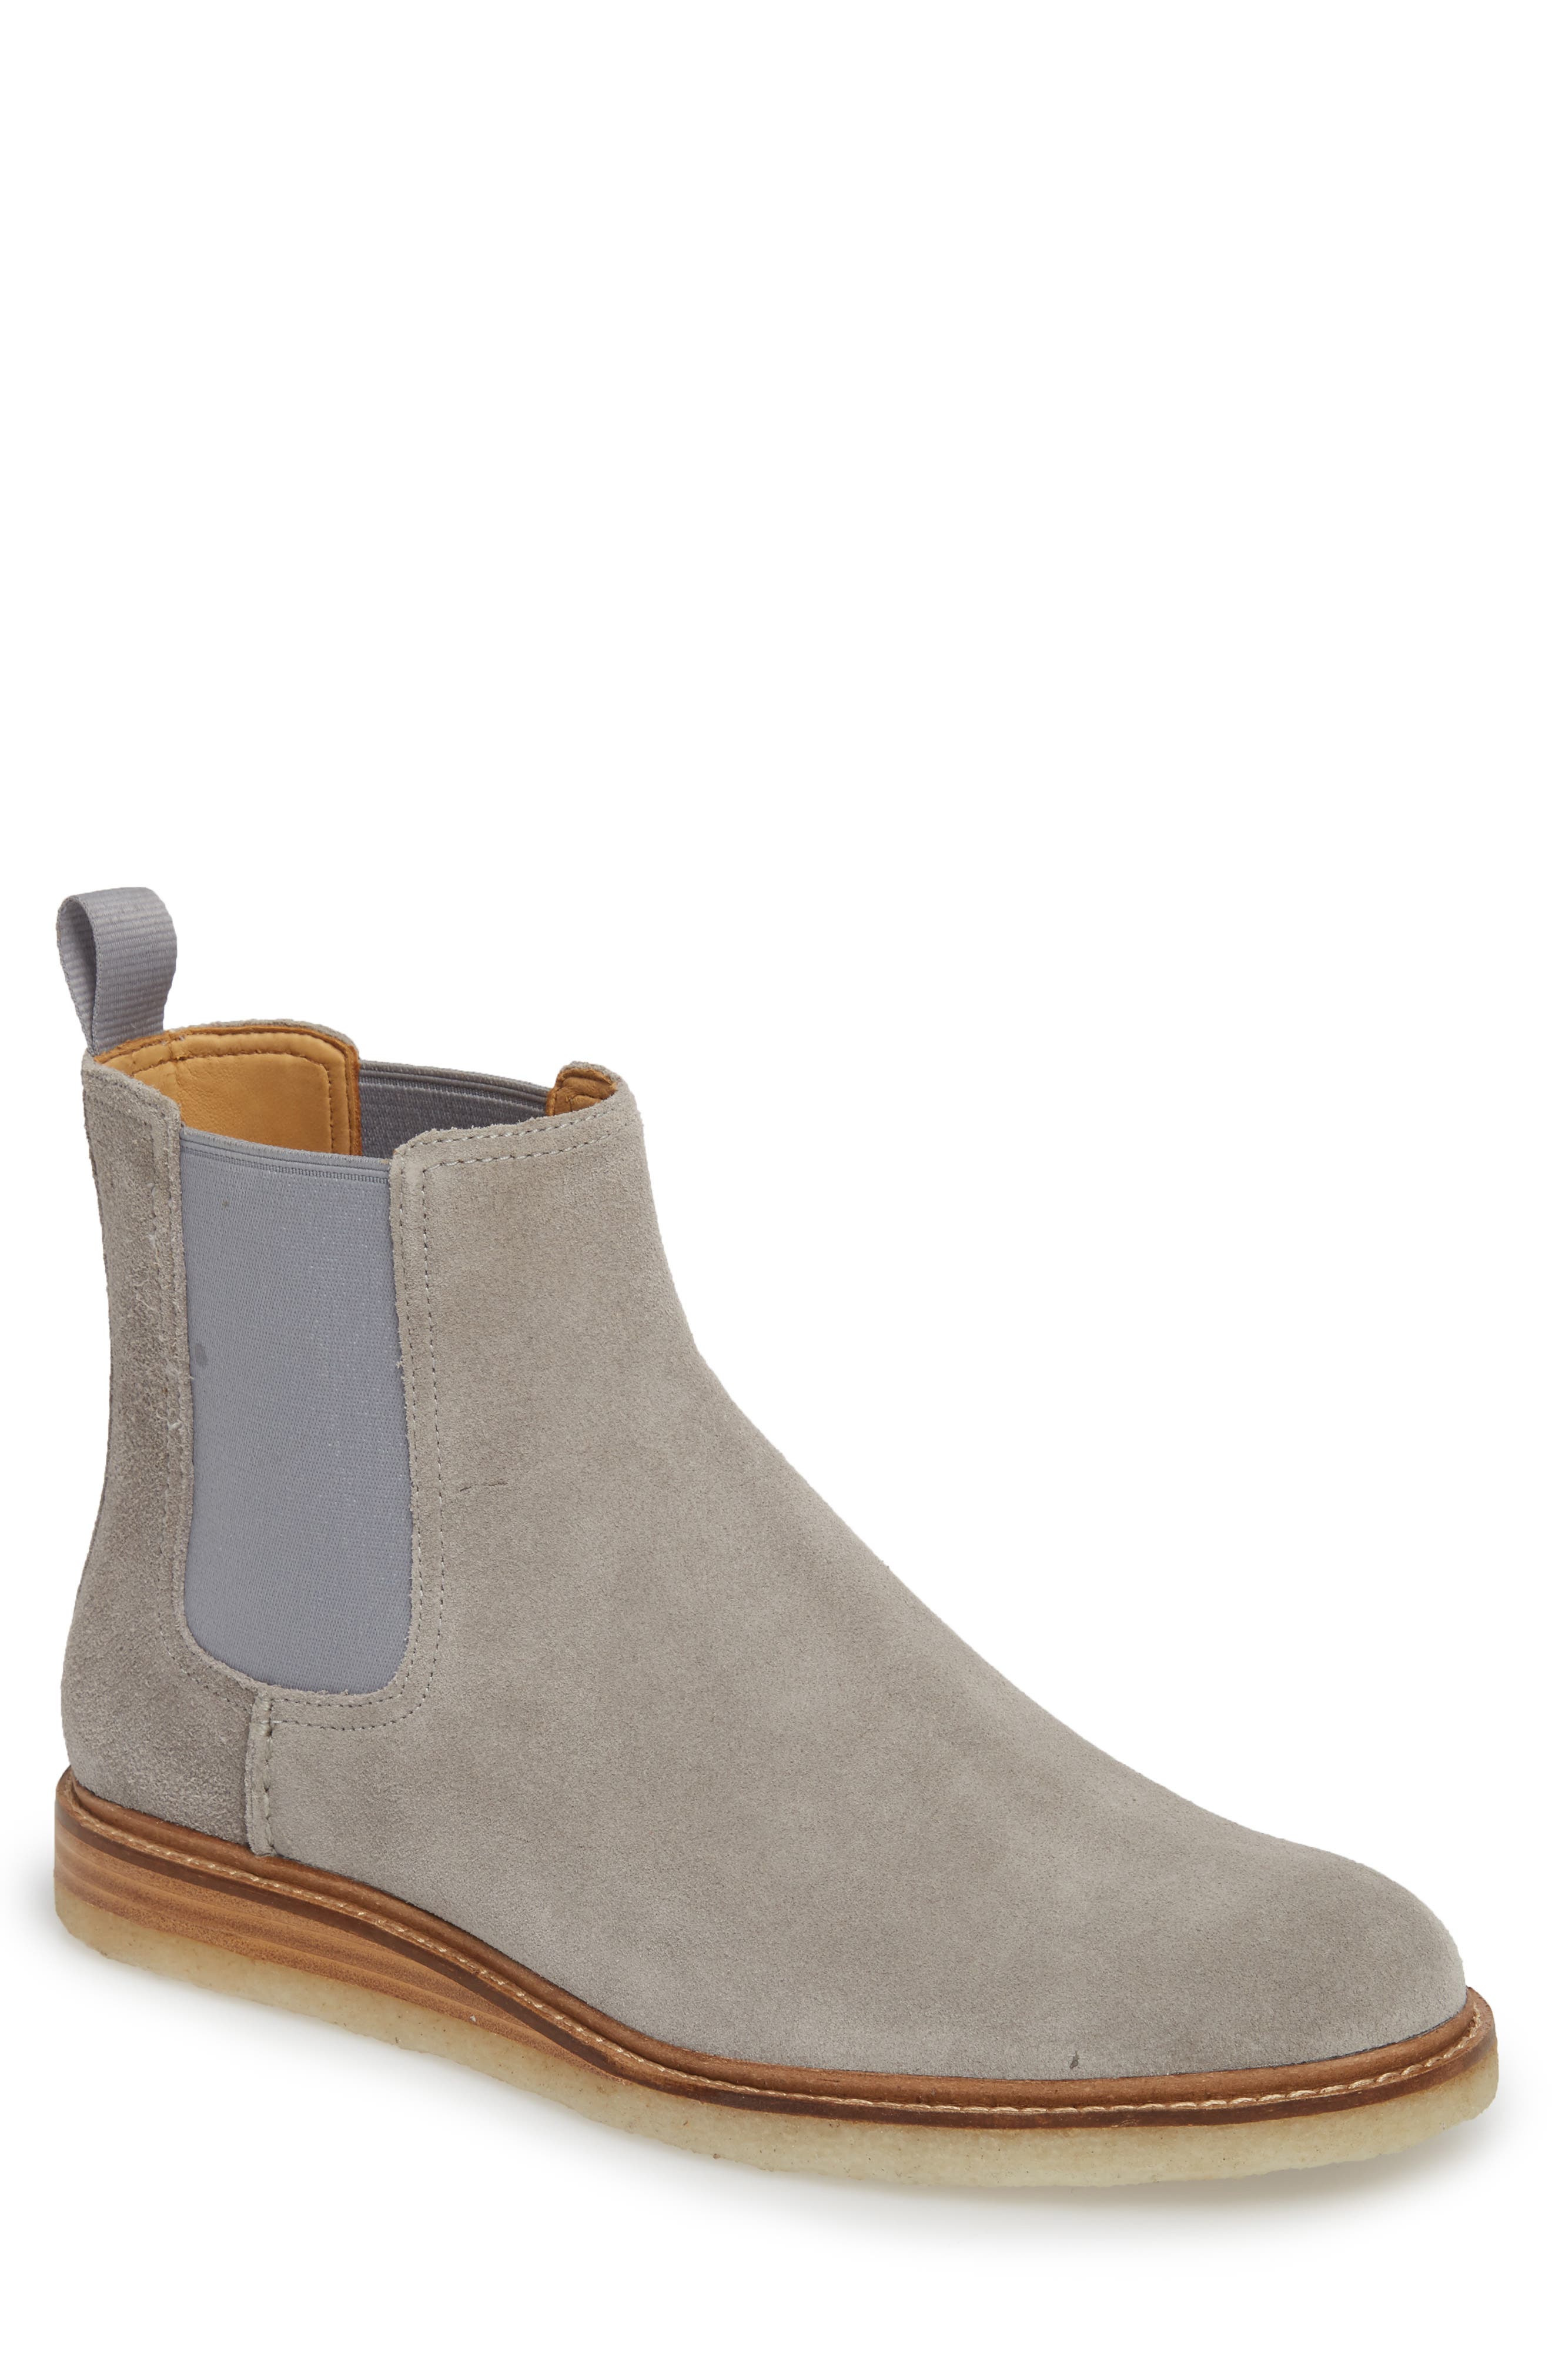 sperry chelsea boot gold cup